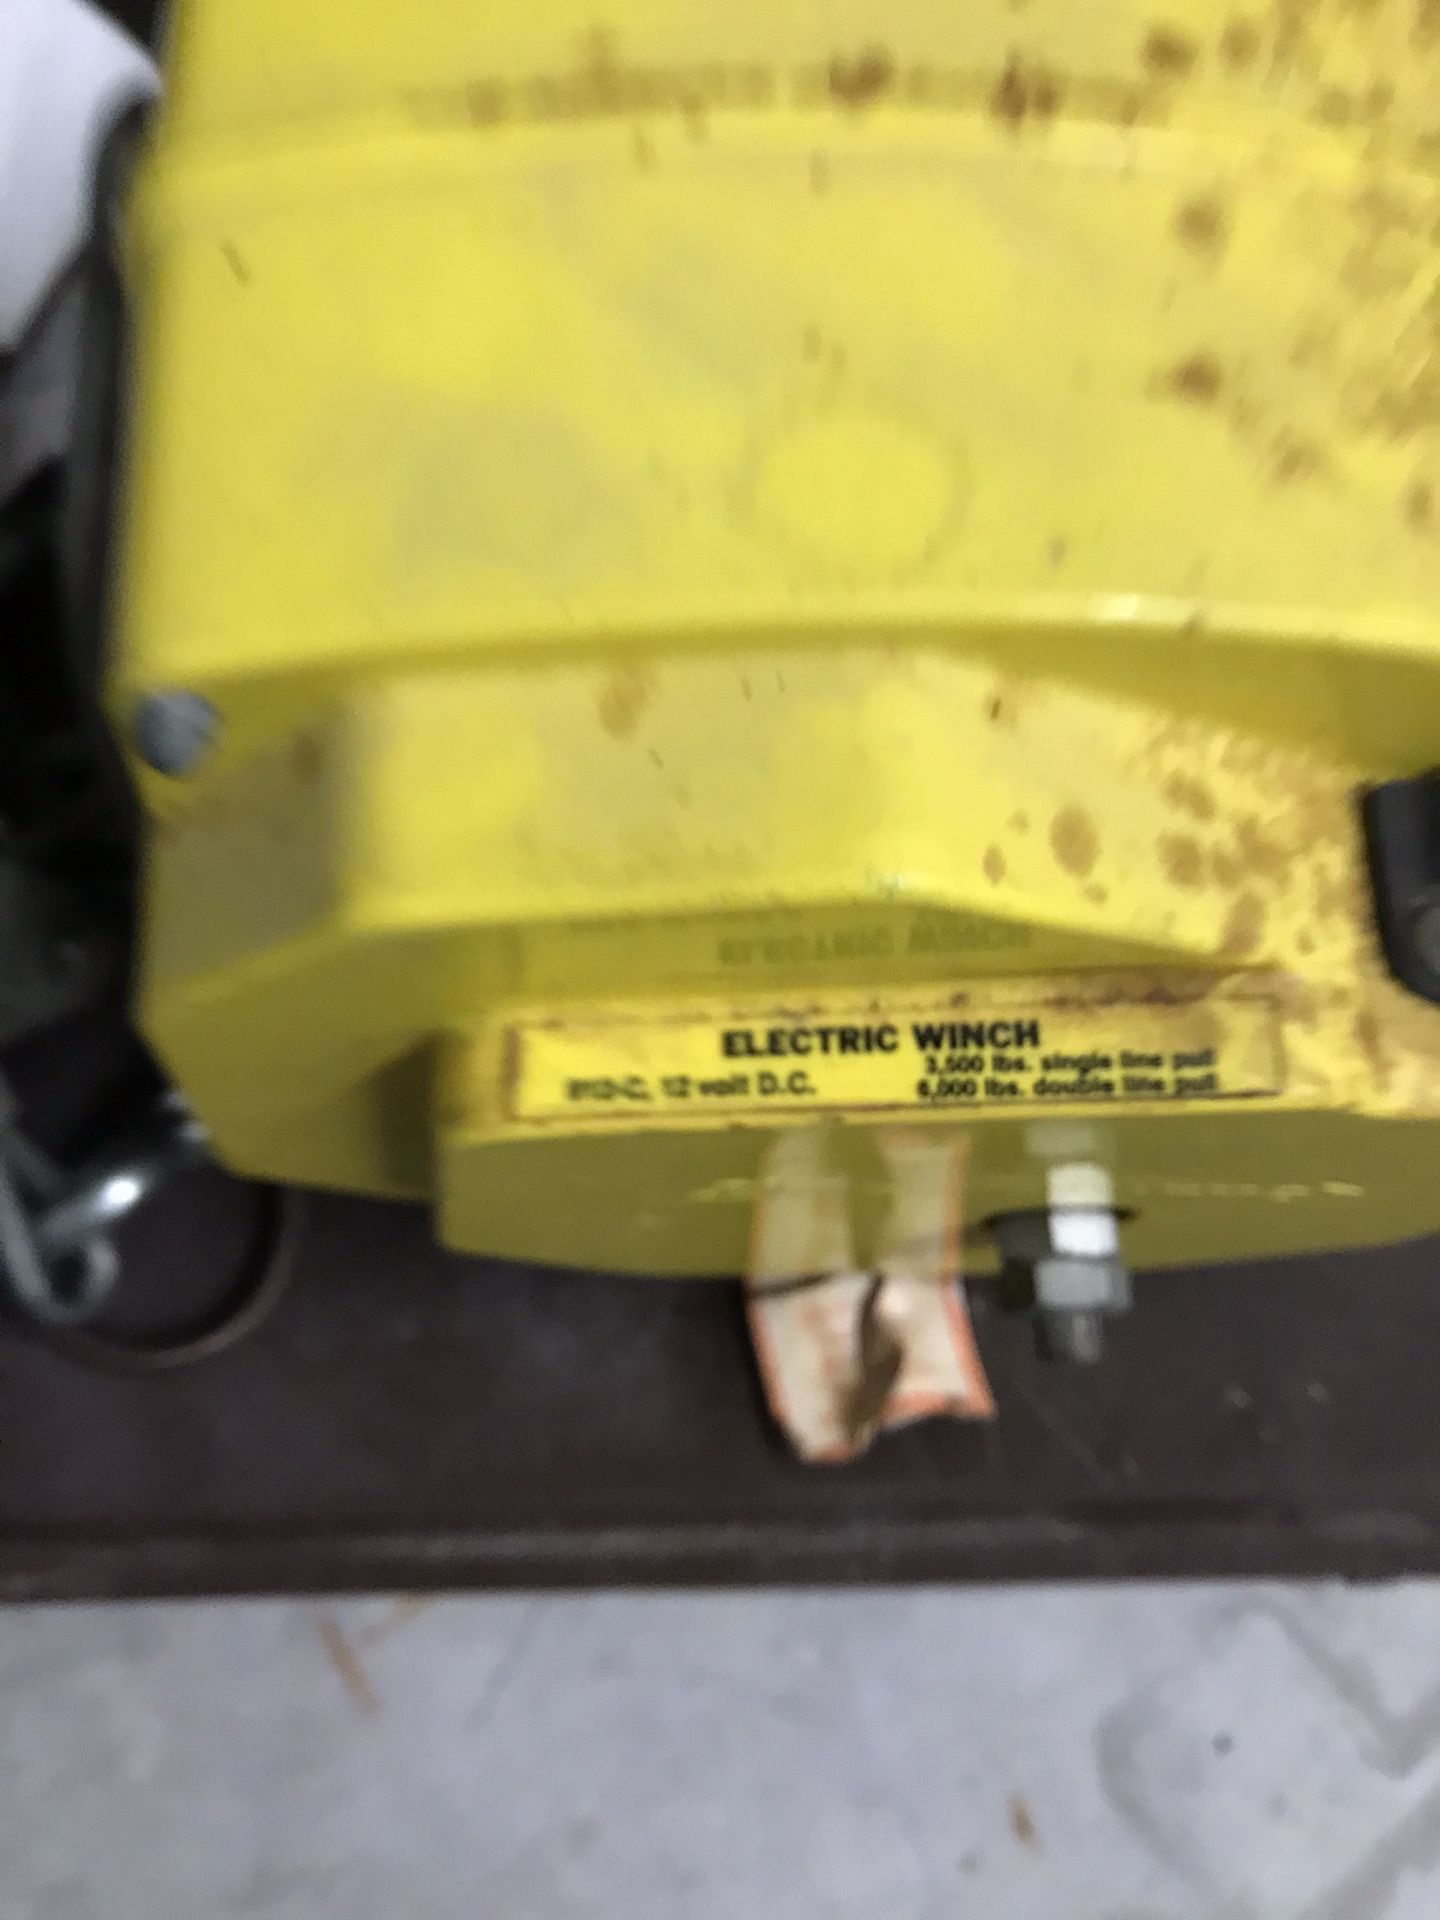 Electric winch 3500 PDs